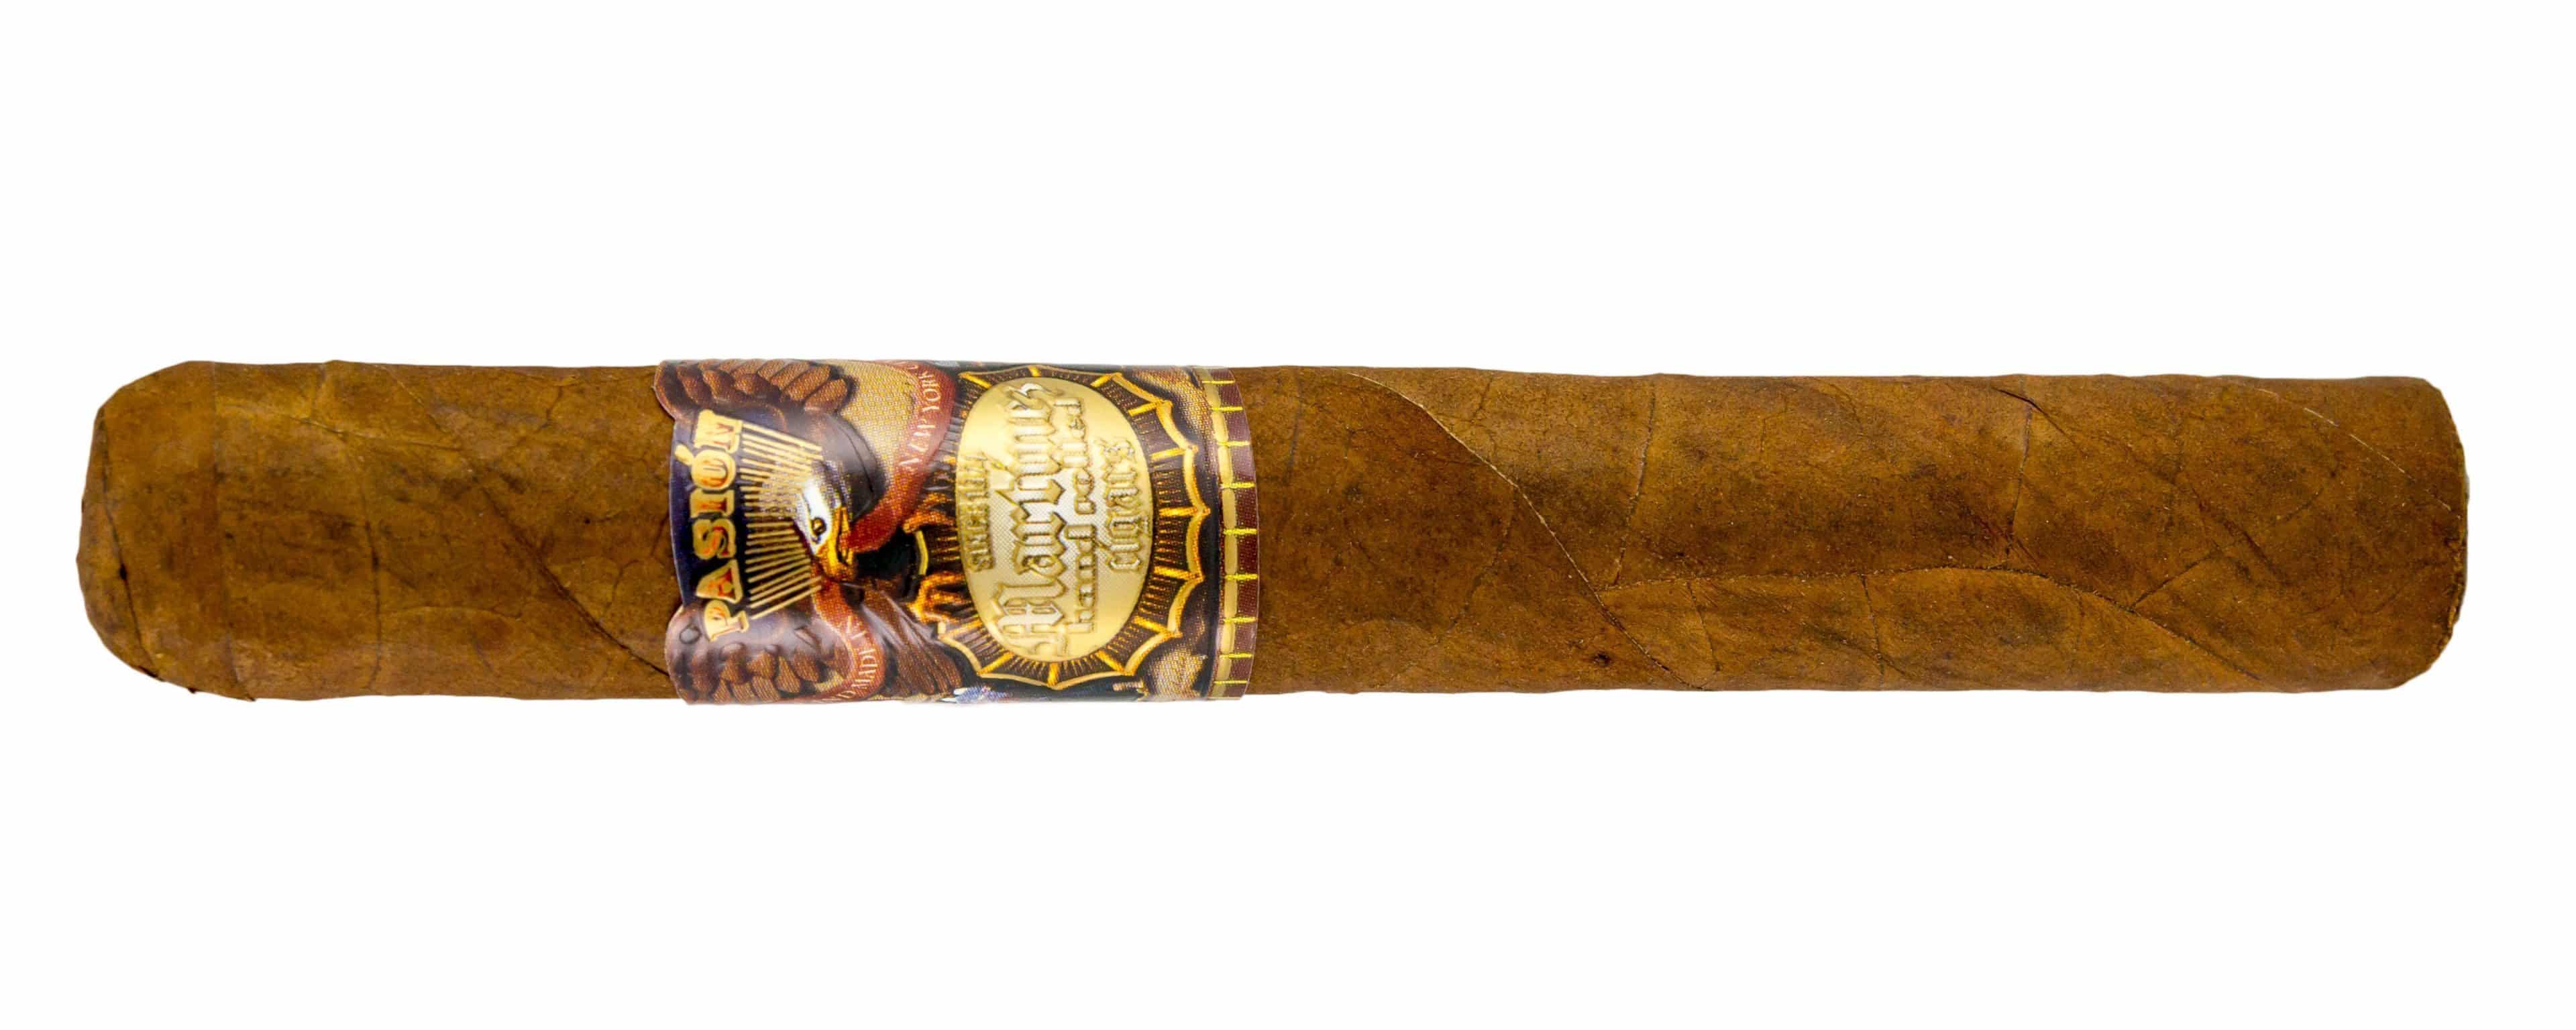 The ultimate in our Pasión experience, the 654 is the boldest of this incredible line. Featuring an aged blend of Nicaraguan long filler tobaccos and wrapped in a spicy Nicaraguan leaf, this medium to full bodied cigar was crafted specifically for those who demand the ultimate in flavor, smoke and enjoyment. It’s bold, easy draw gives way to the characteristic complex, spicy notes with strong peppery hints.